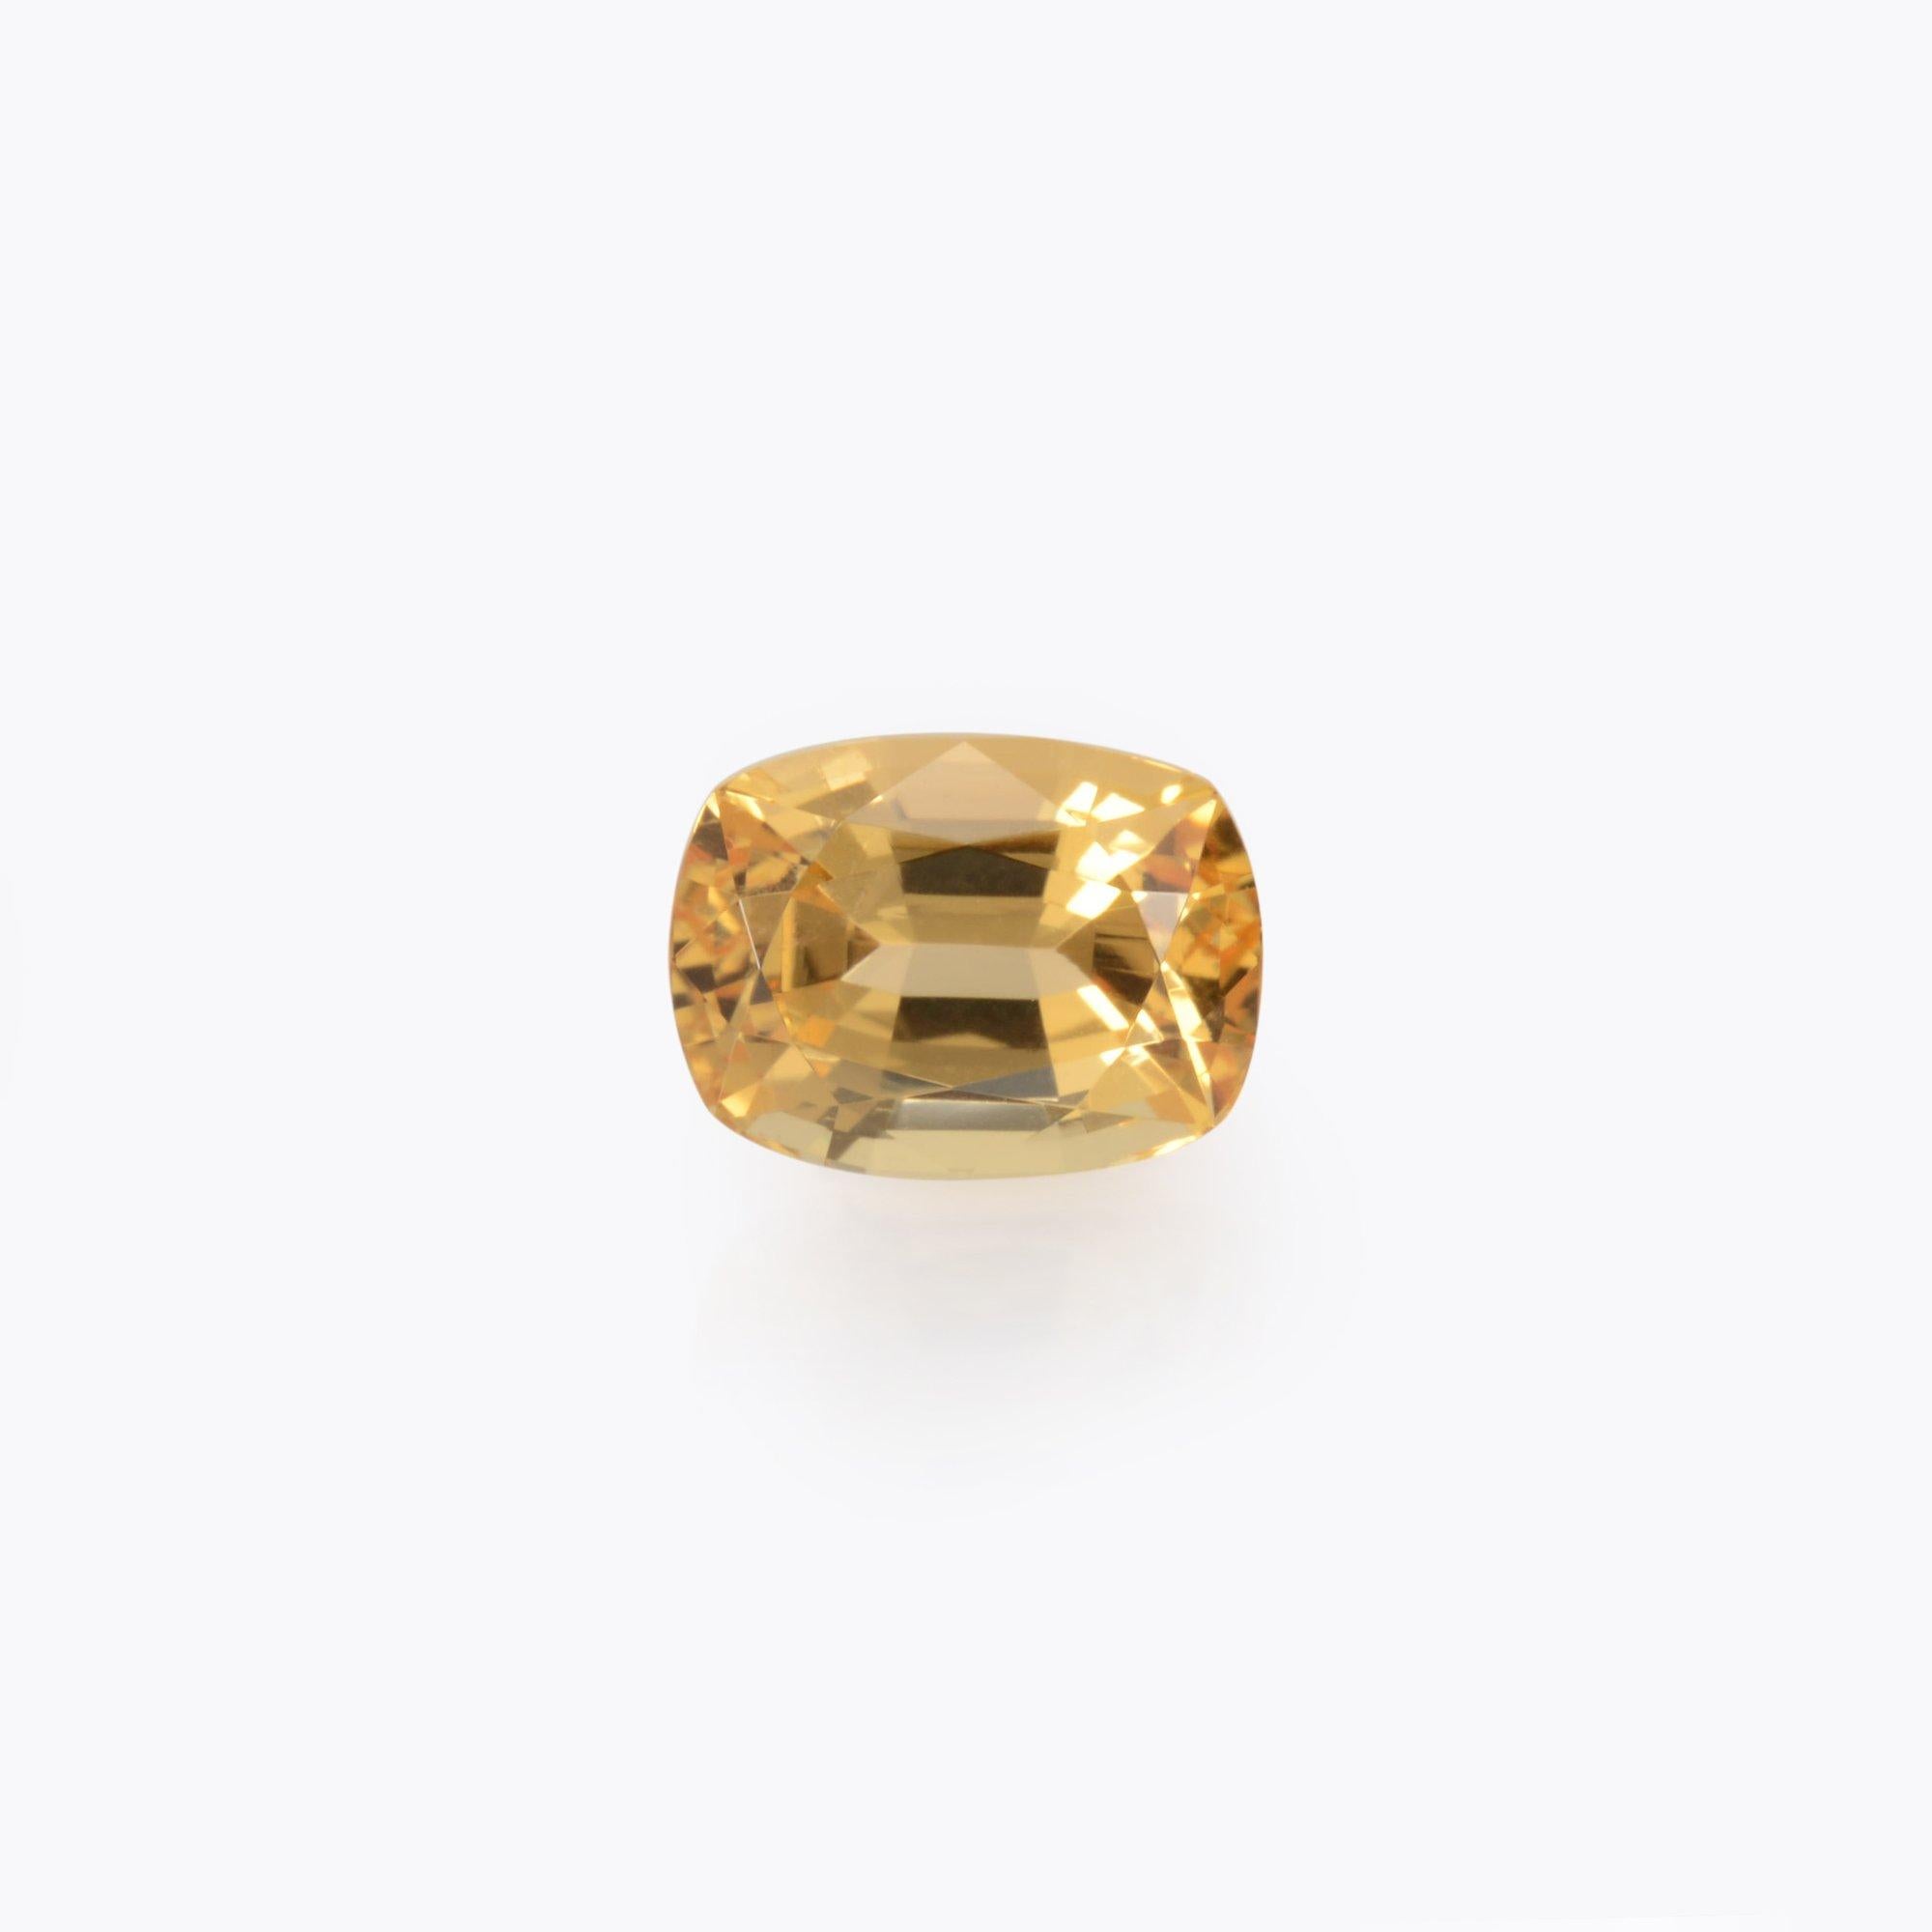 Special 3.52 carat Precious Brazilian Imperial Topaz cushion gemstone, offered loose.
Returns are accepted and paid by us within 7 days of delivery.
We offer supreme custom jewelry work upon request. Please contact us for more details.
For your